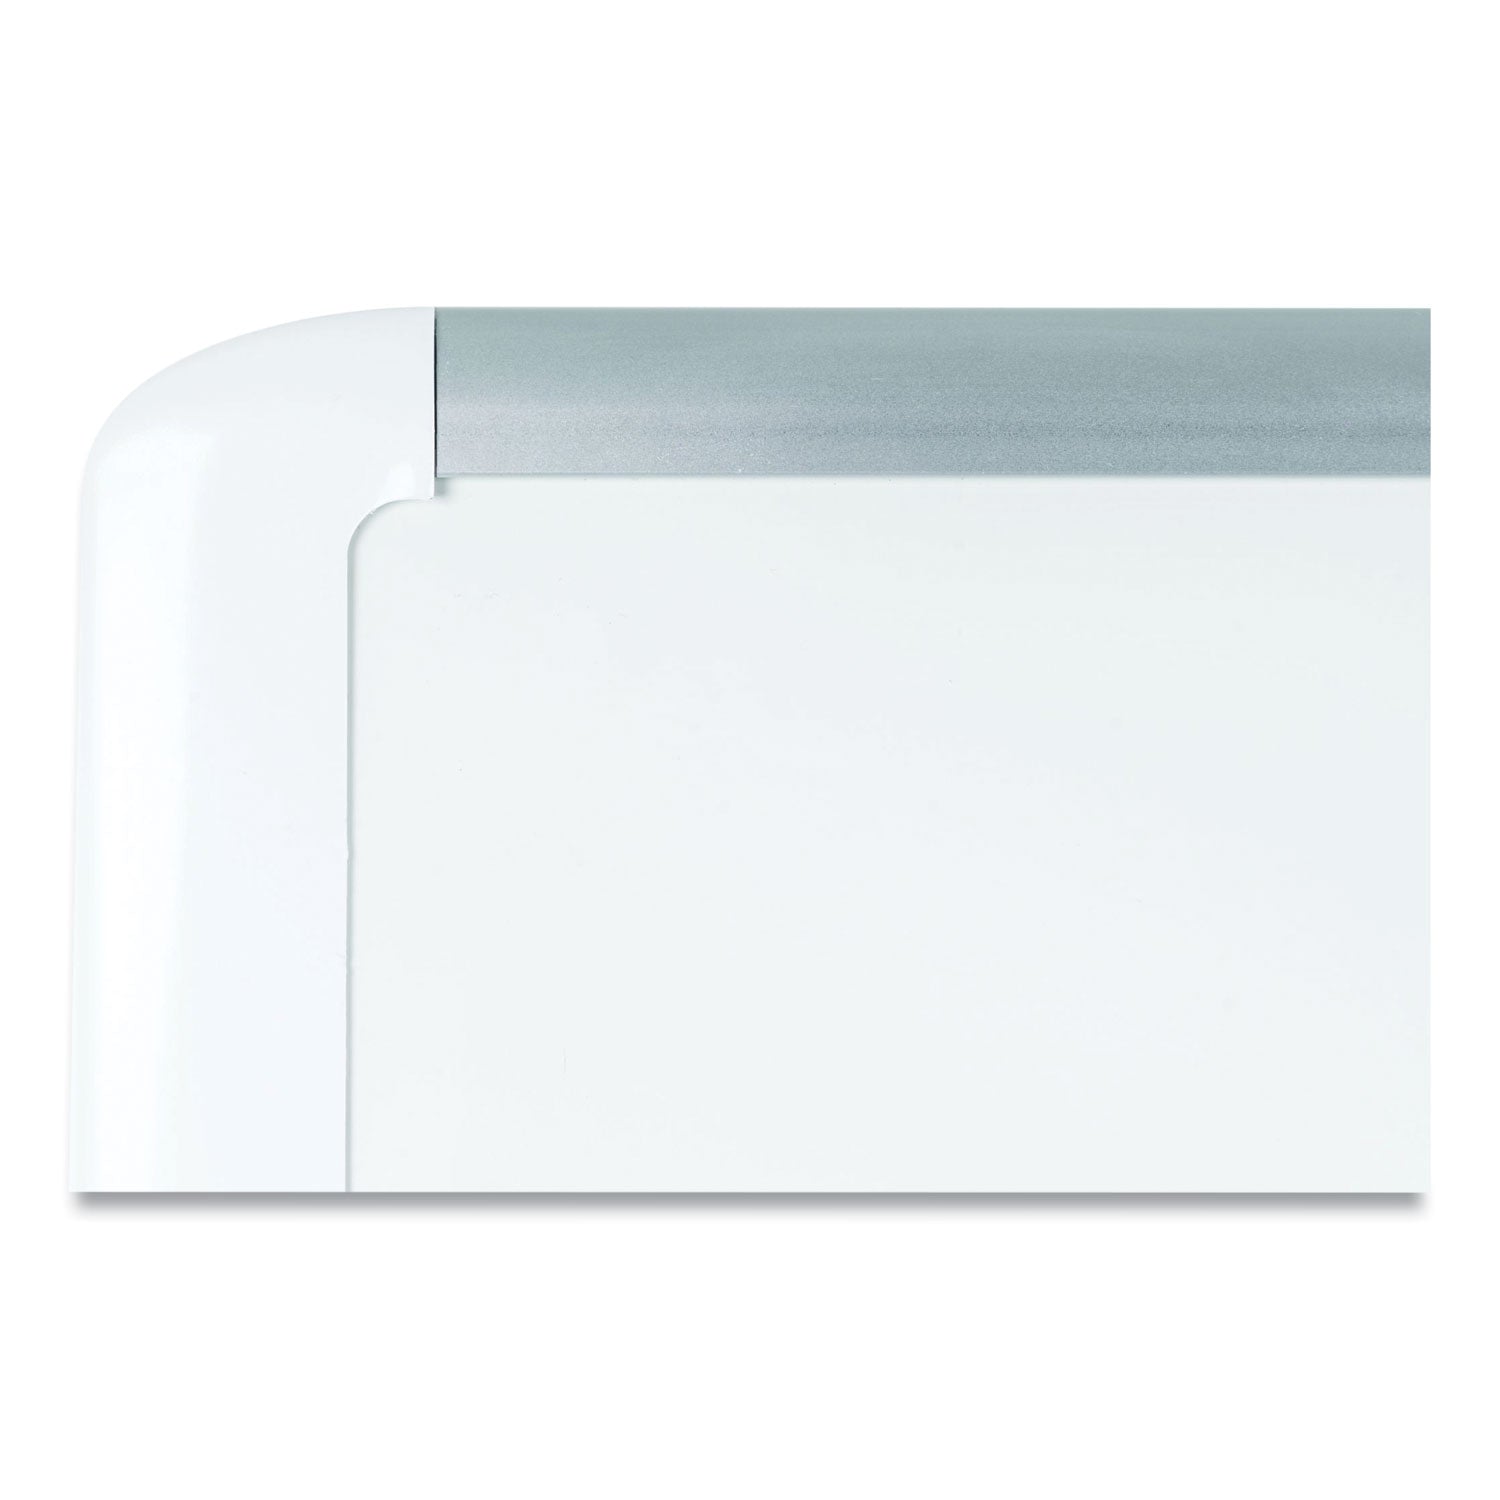 Gold Ultra Magnetic Dry Erase Boards, 72 x 48, White Surface, White Aluminum Frame - 